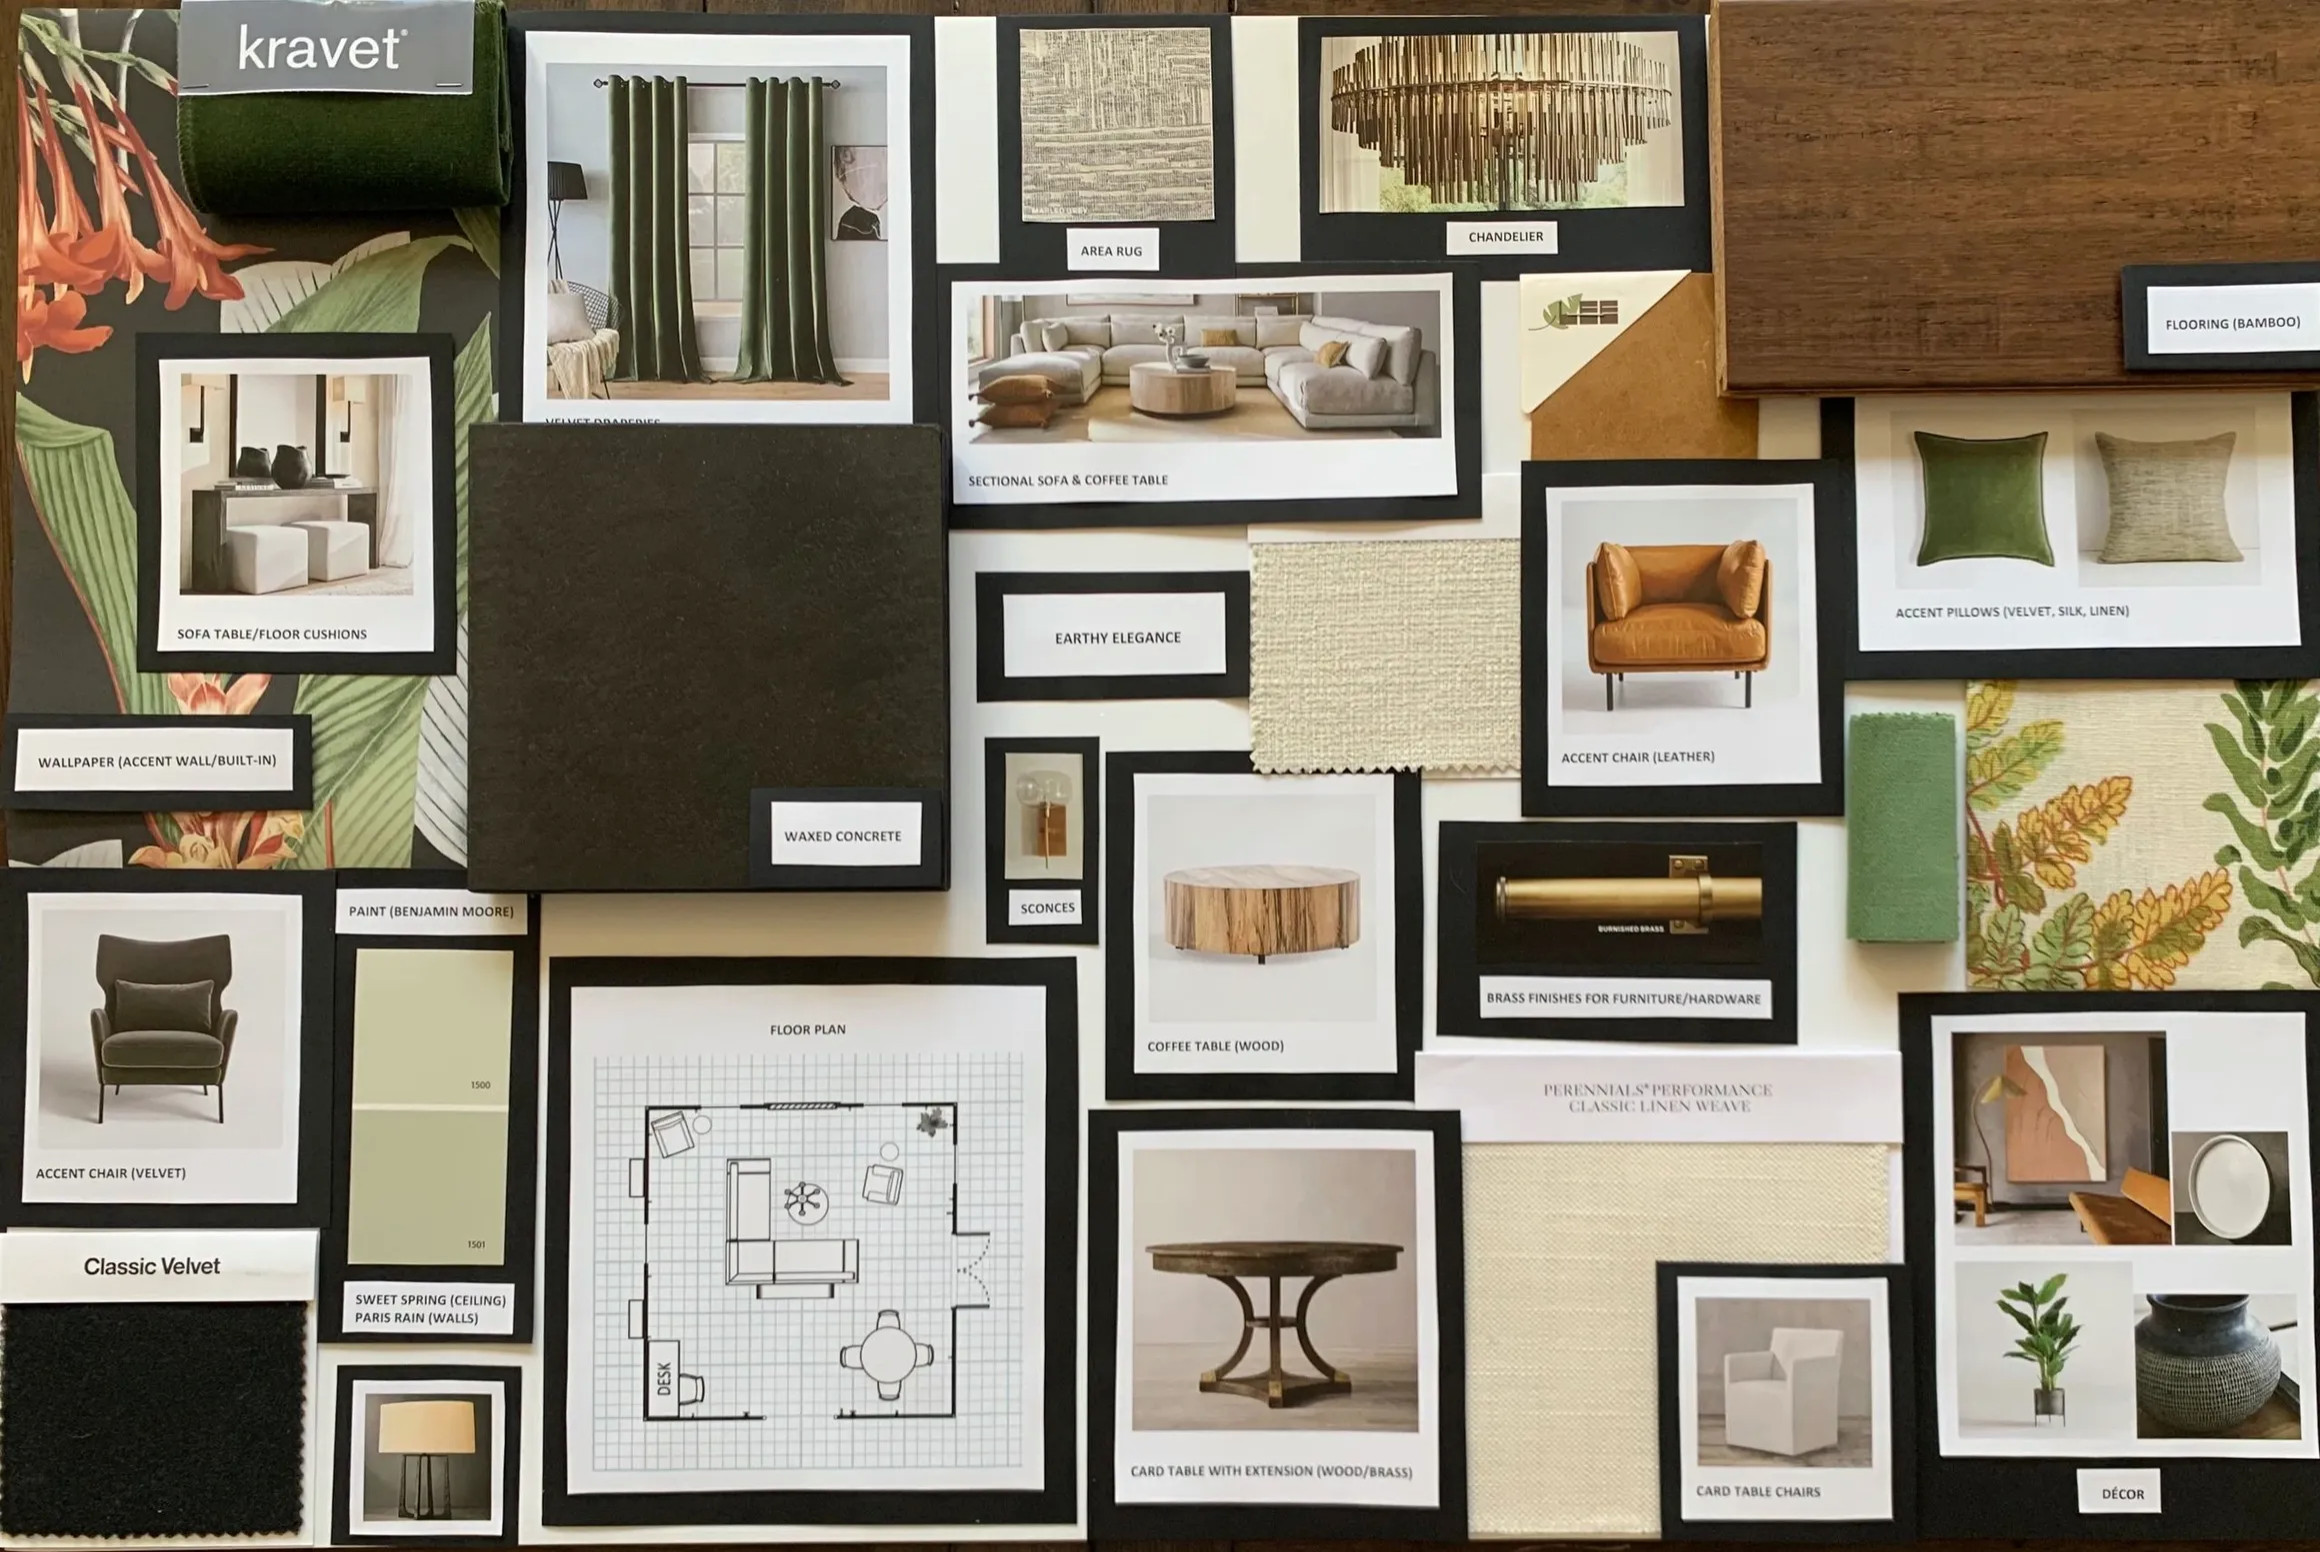 nature-inspired, earthy interior design mood board, family and kids rooms interior design